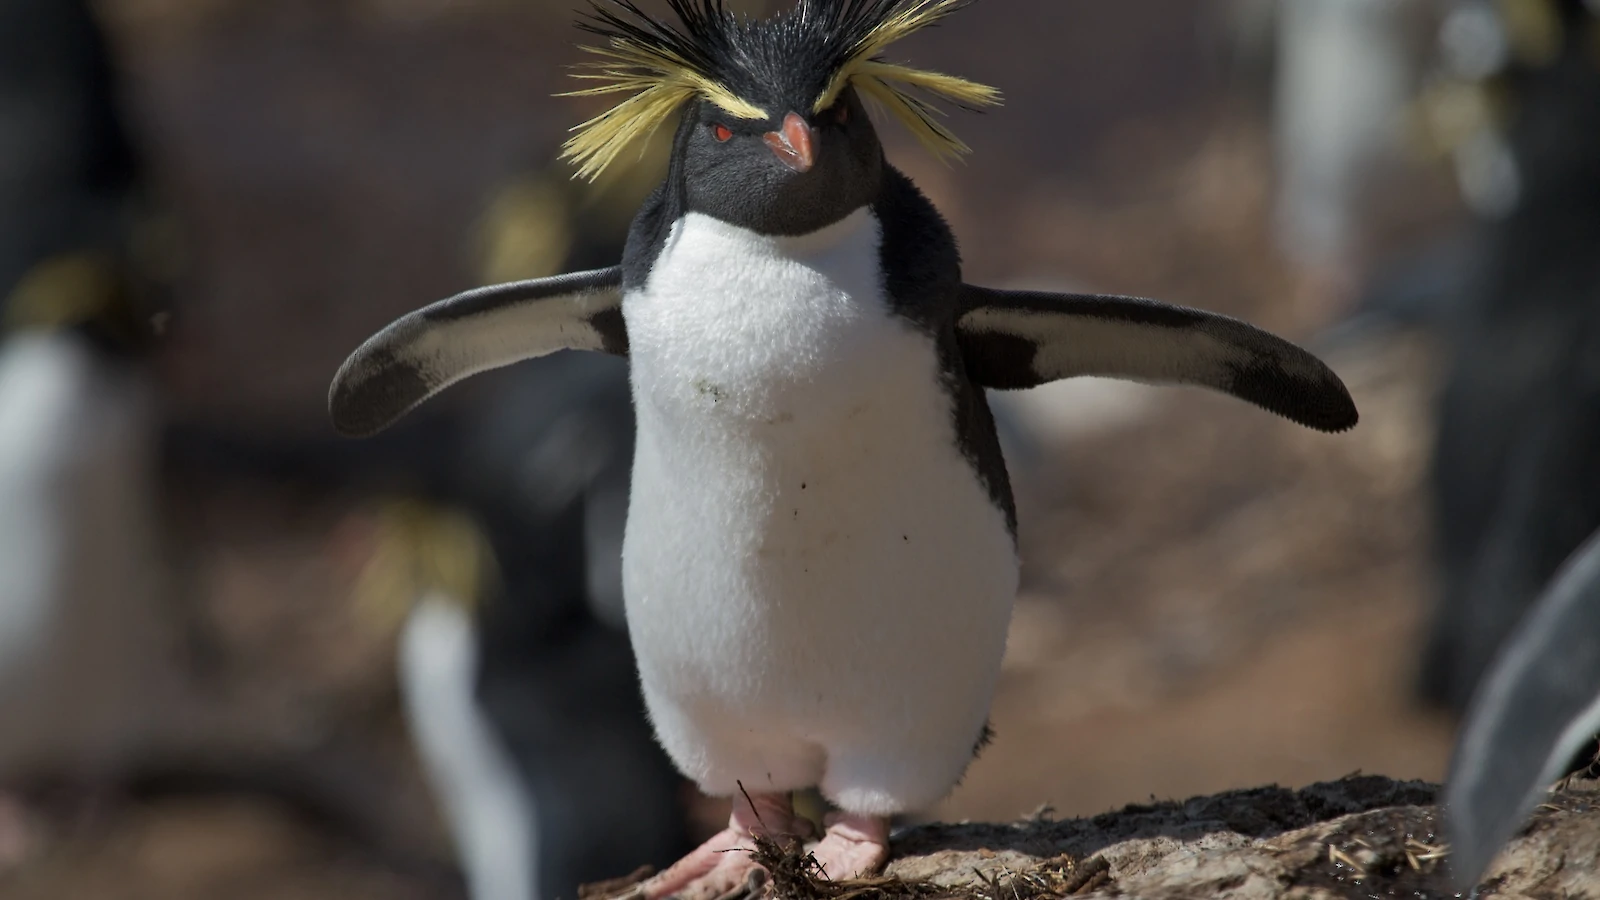 Meet the Penguins With Yellow Hair: Most Stylish Birds